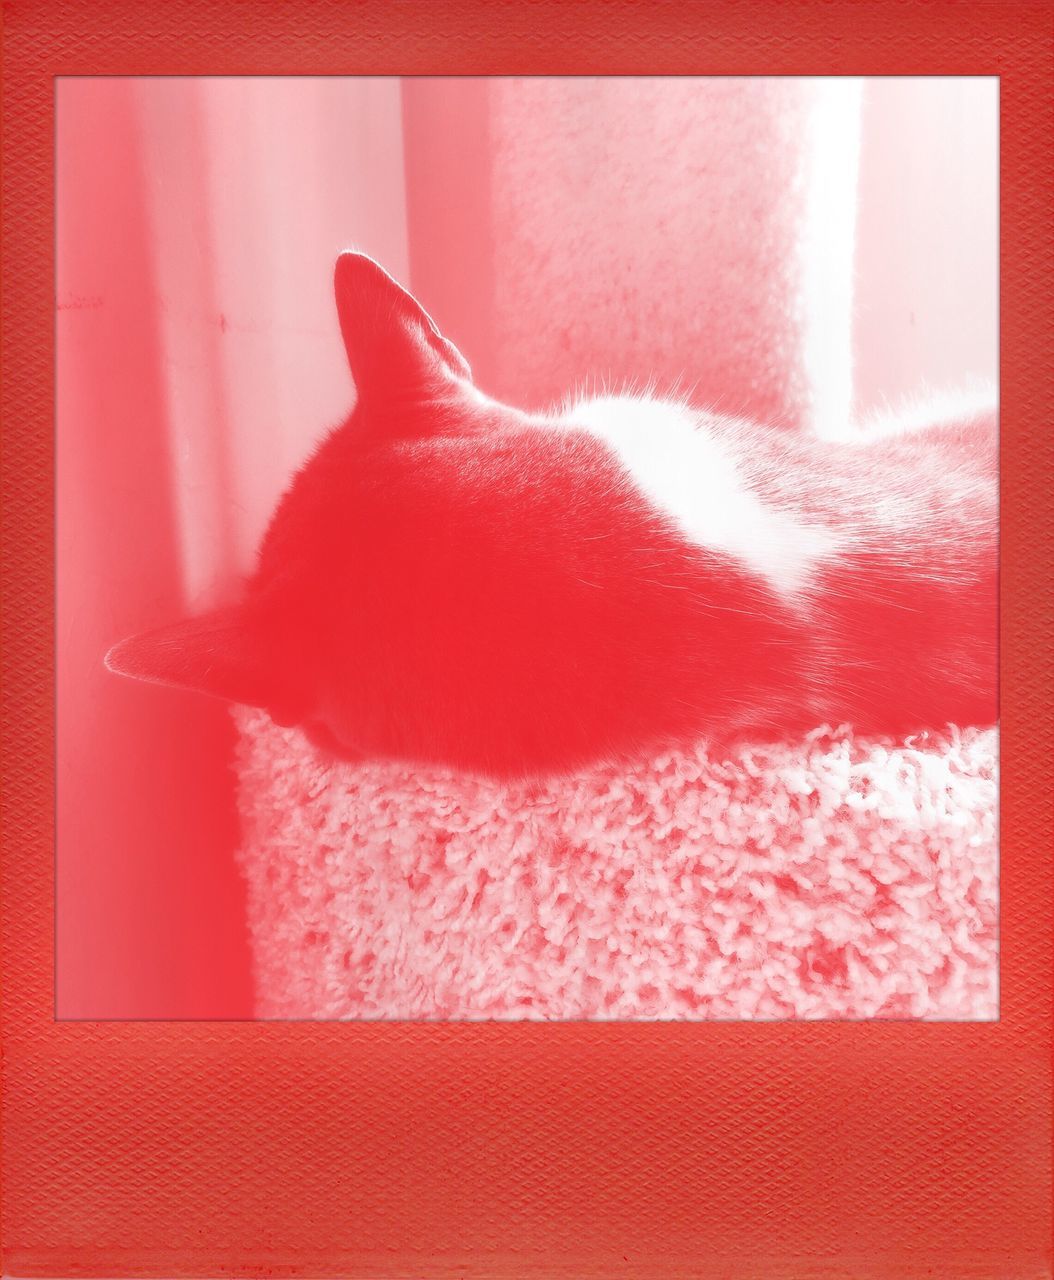 animal themes, red, one animal, domestic animals, indoors, pets, domestic cat, mammal, cat, close-up, feline, window, no people, home interior, wall - building feature, glass - material, day, auto post production filter, relaxation, pink color